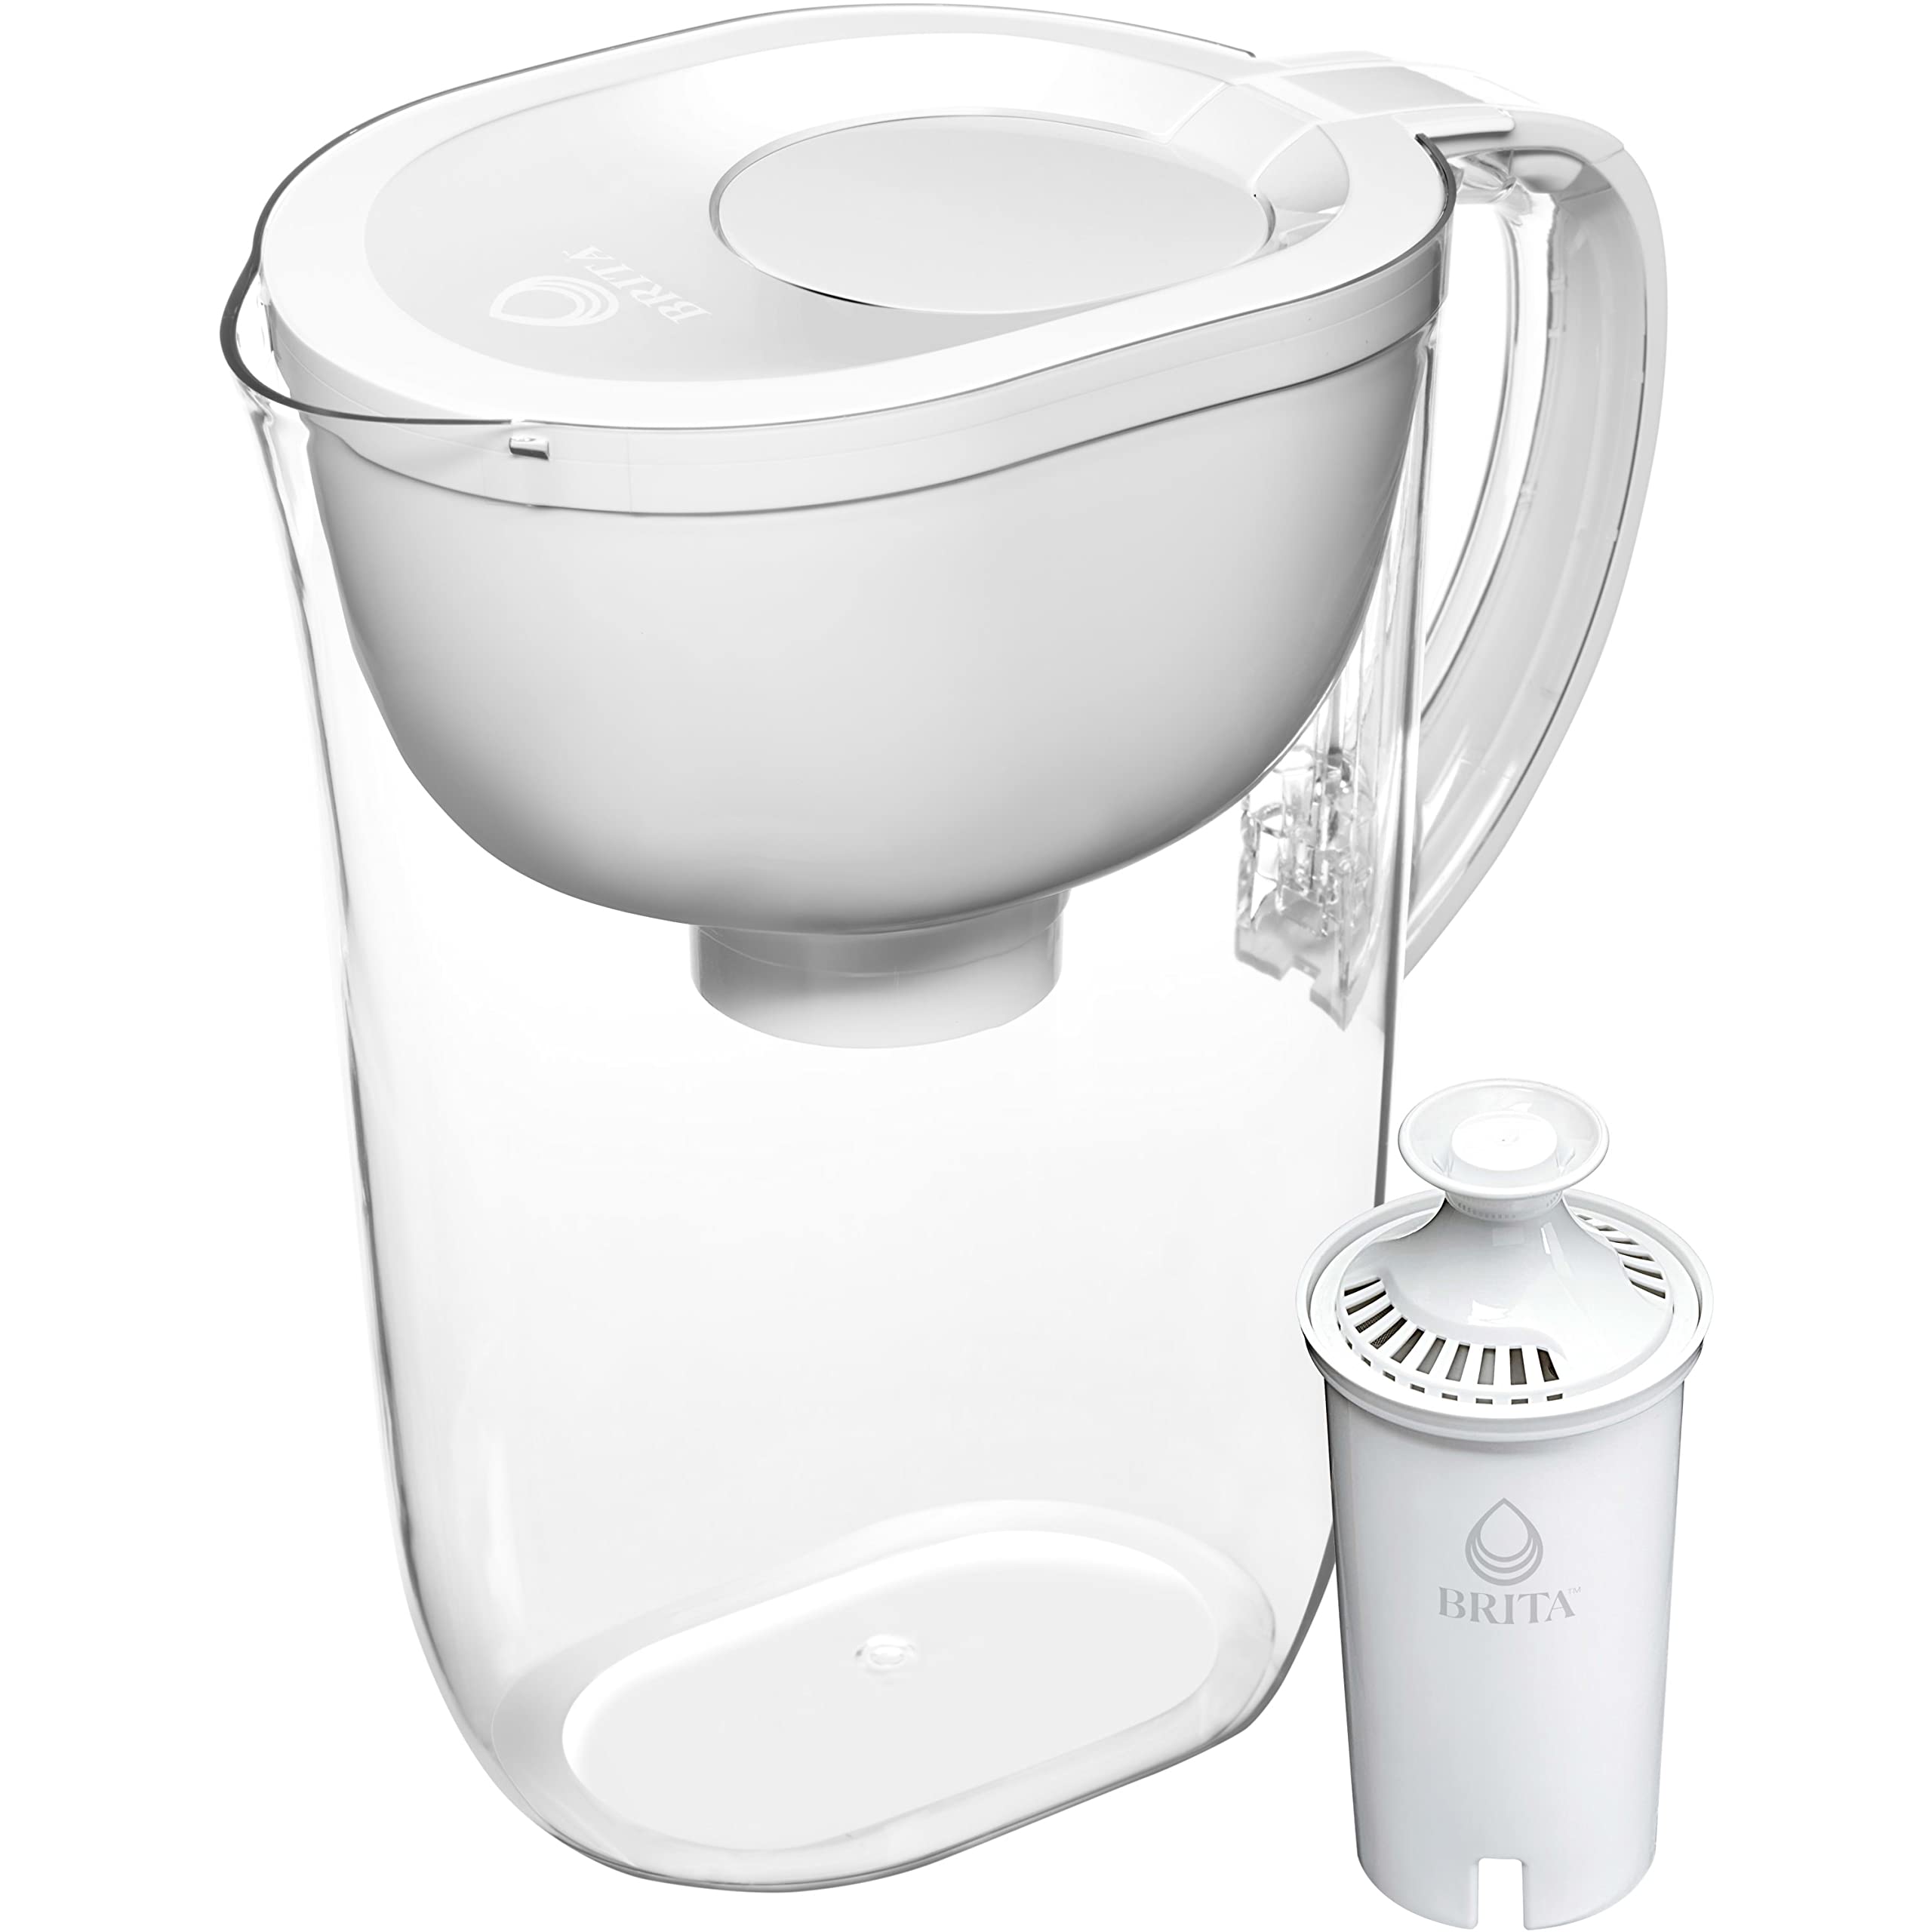 Book Cover Brita Large Water Filter Pitcher for Tap and Drinking Water with 1 Standard Filter, Lasts 2 Months, 10-Cup Capacity, BPA Free, White (Design May Vary) Water Dispenser